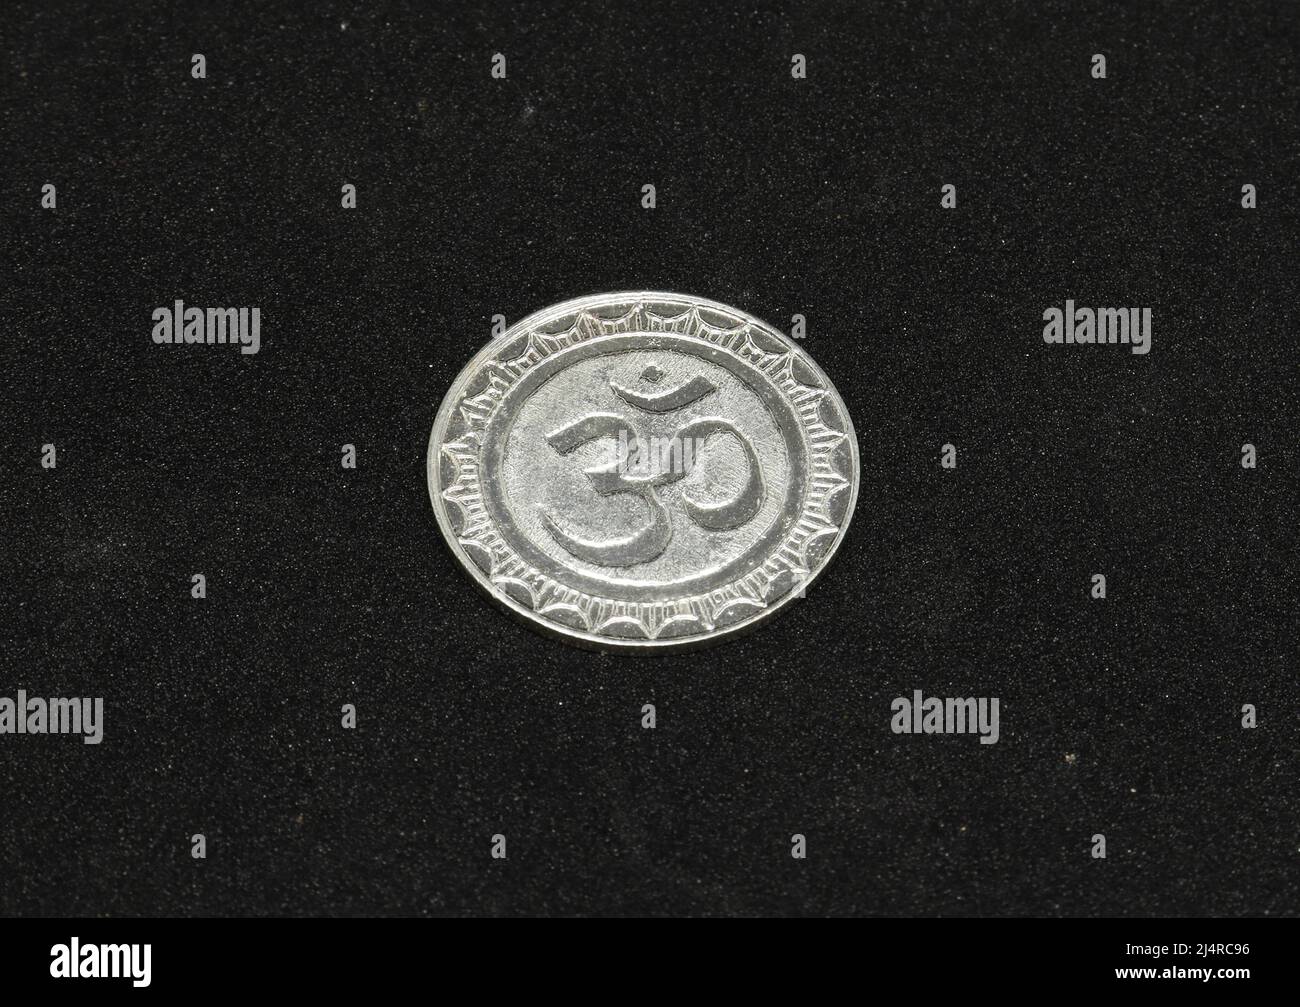 ohm symbol silver metal coin. on a black background Stock Photo